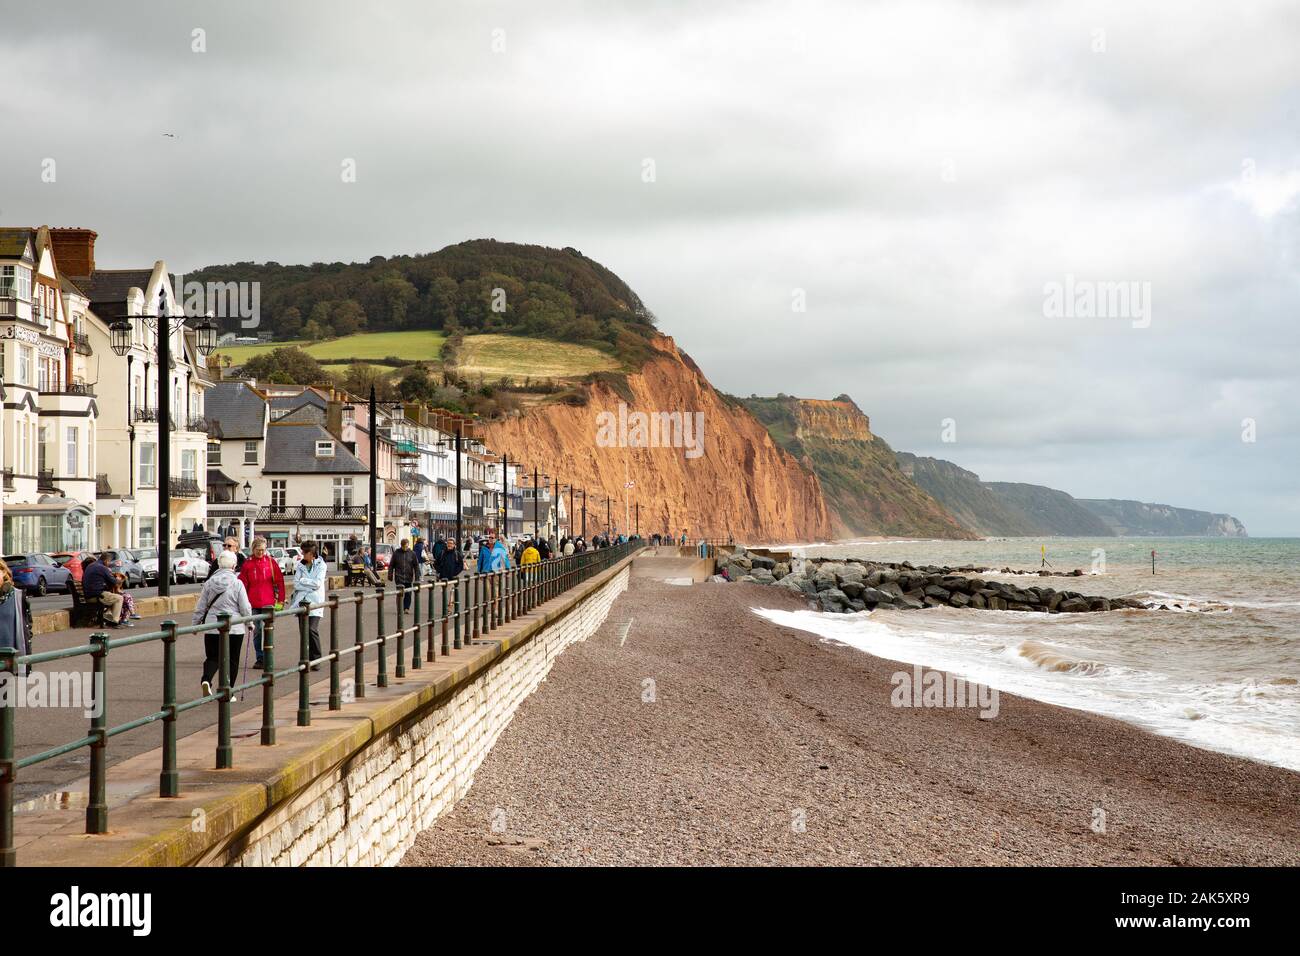 The sea front in the town of Sidmouth, Devon, Uk Stock Photo